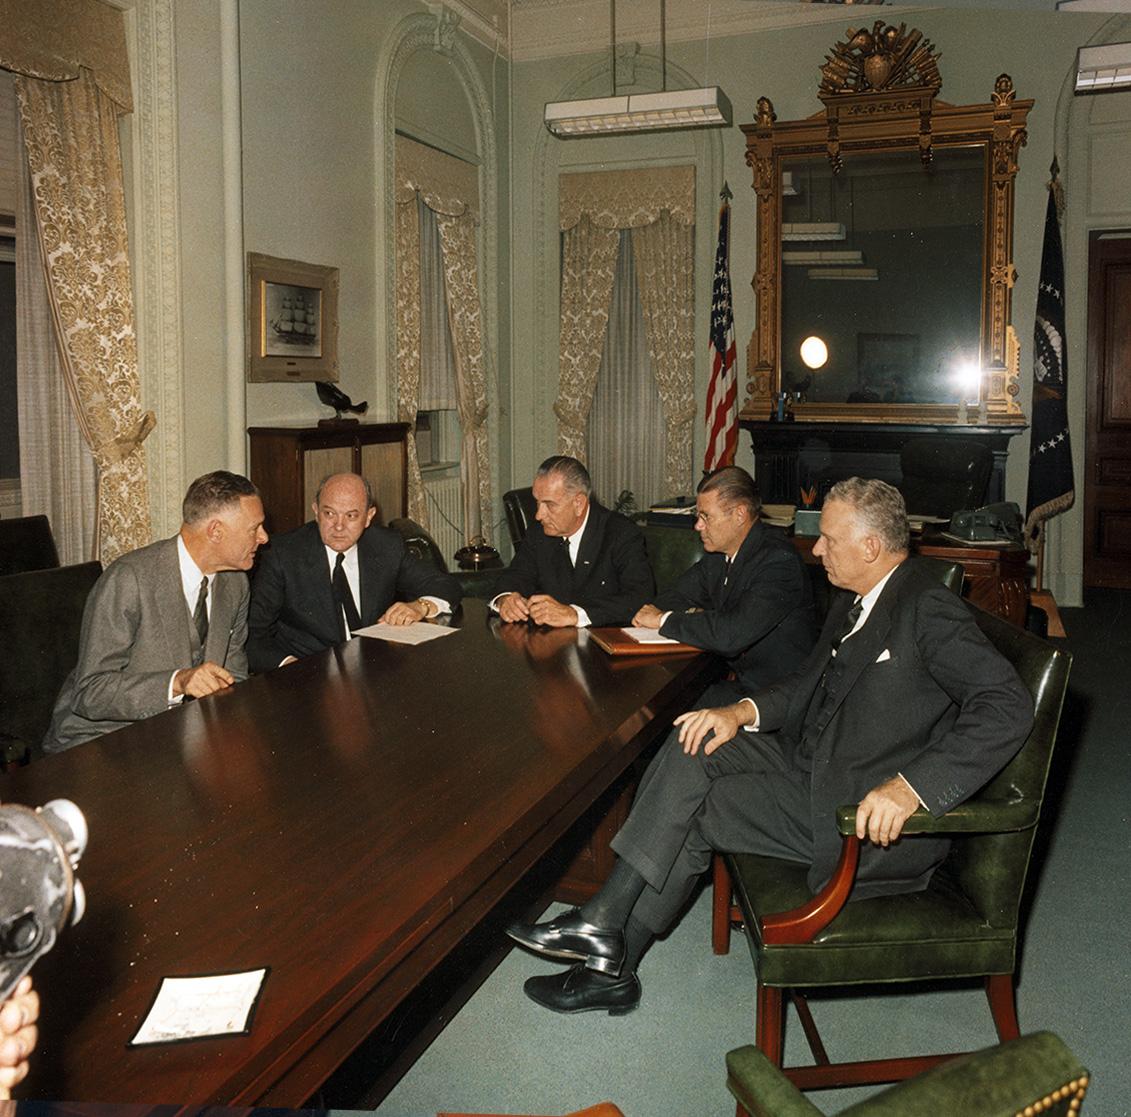 Lodge was the first diplomat that LBJ saw as president. Lodge returned to consult with JFK about the coup, learned while en route that he had been killed, and instead briefed LBJ while still in his EOB office (along with Rusk, McNamara, and Ball)